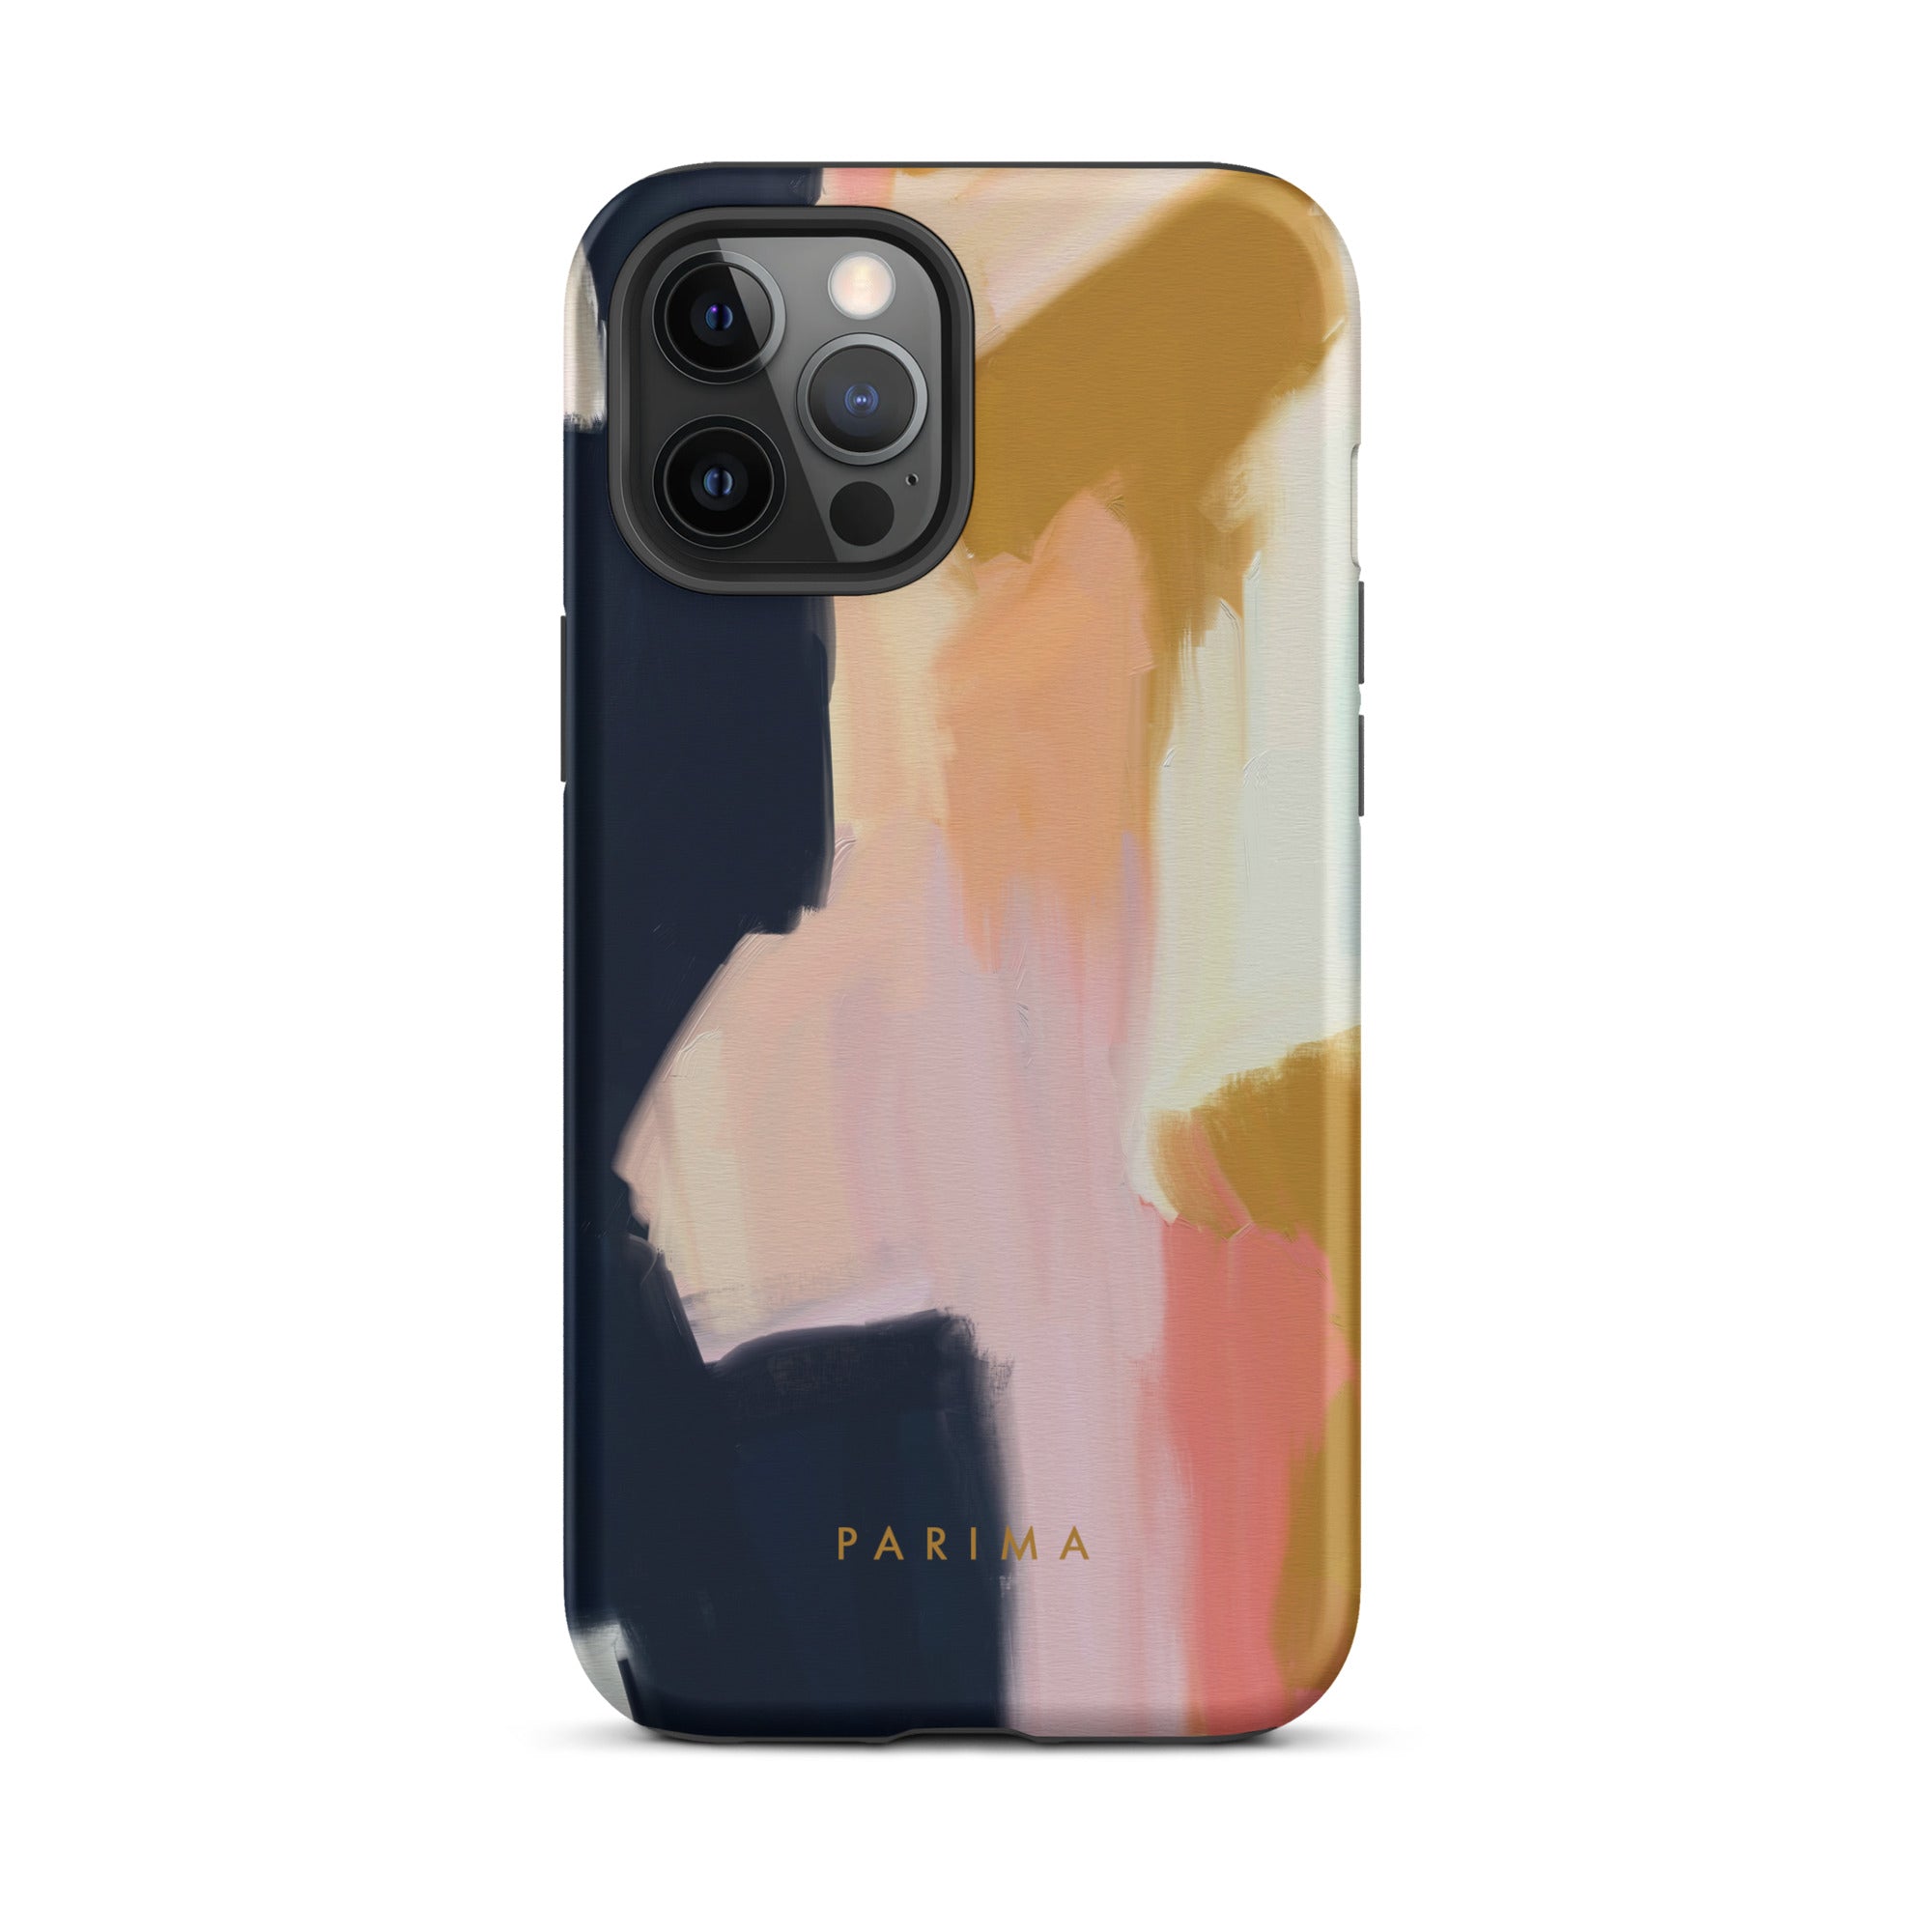 Kali, blue and gold abstract art - iPhone 12 Pro Max tough case by Parima Studio